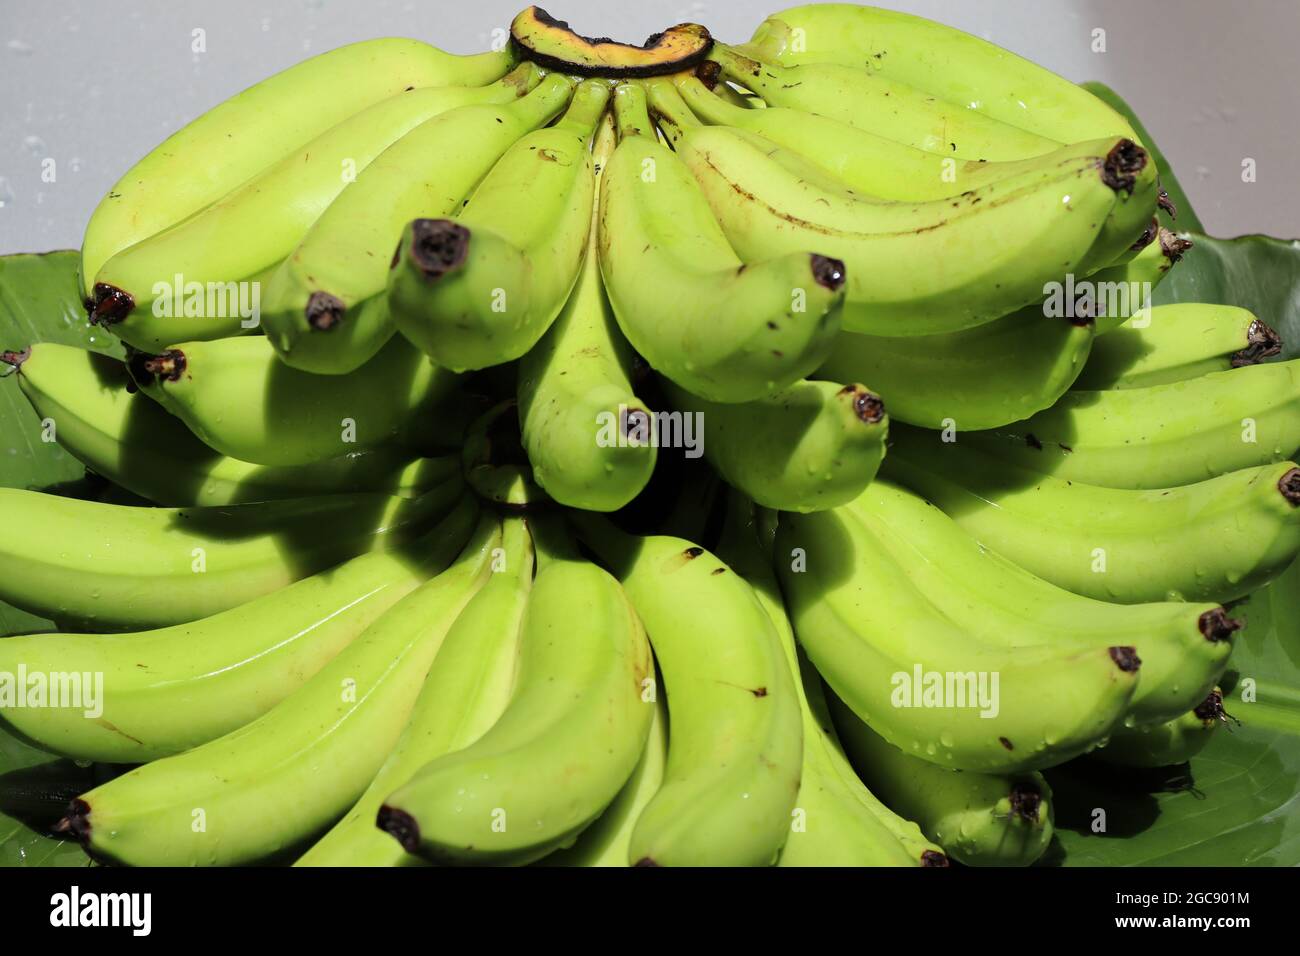 Home grow banana from Sri Lanka, very popular fruit to cultivate in home gardens every where in the island, so very tasty fruit. Stock Photo